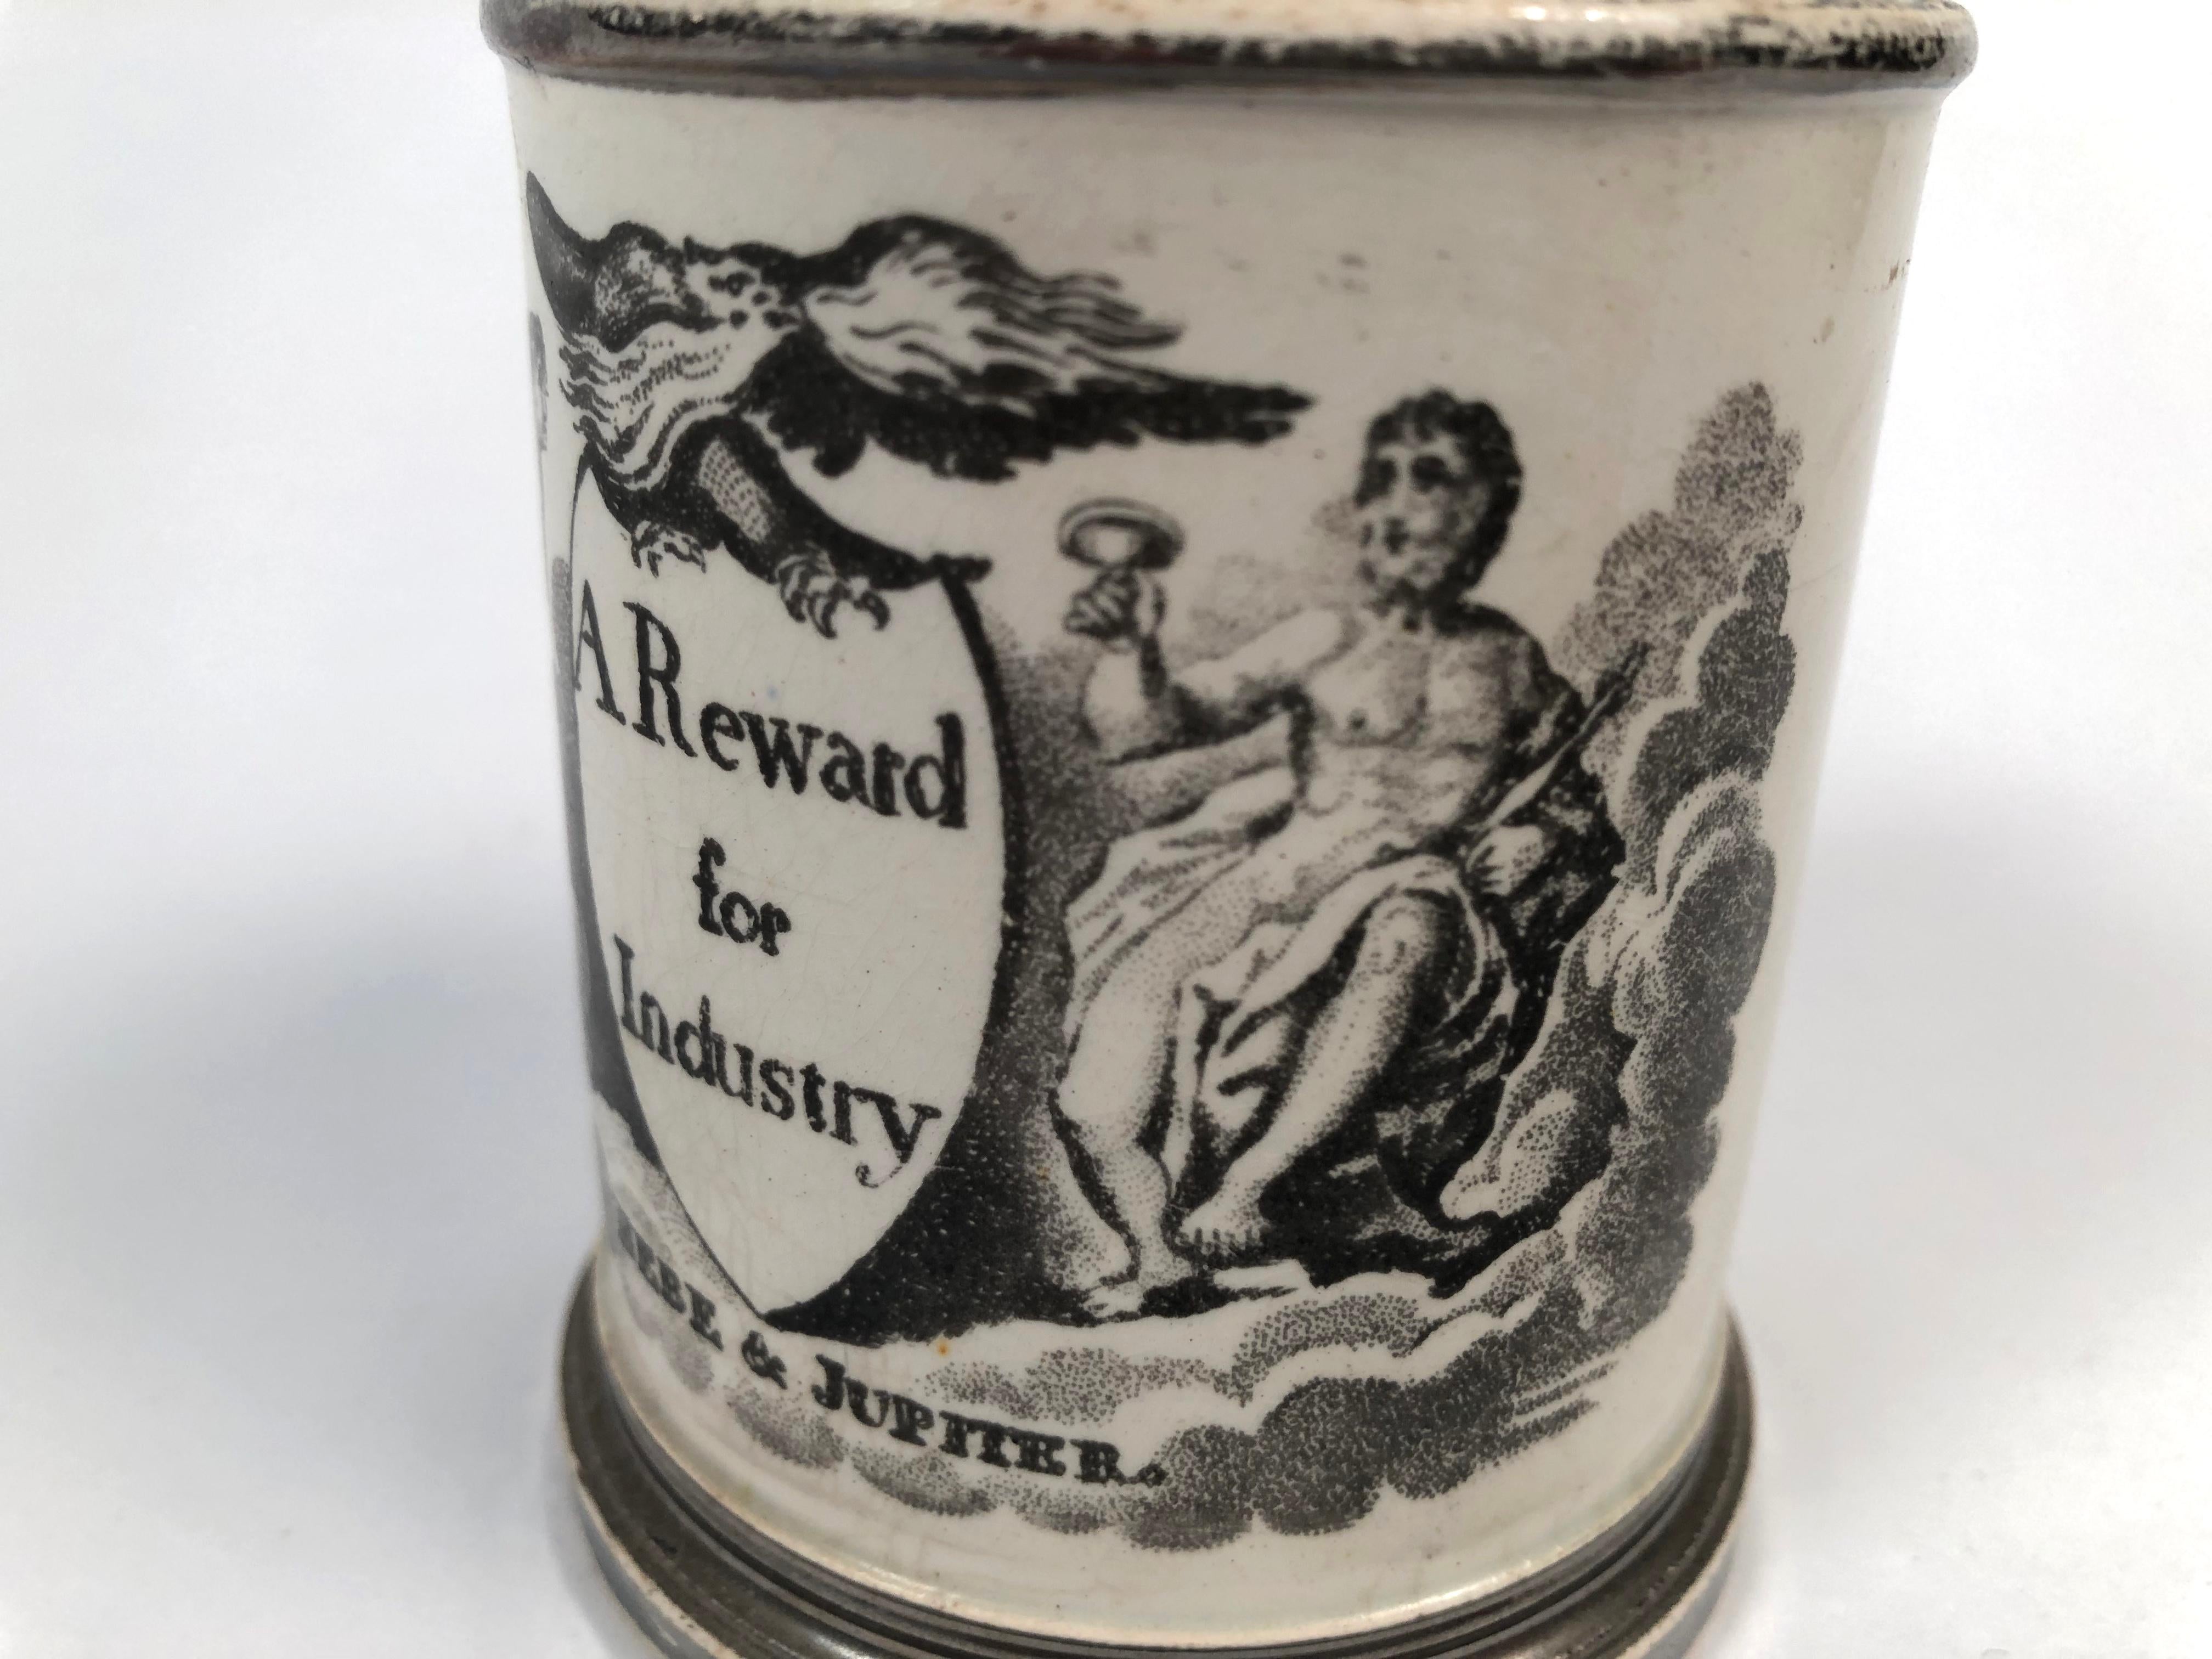 19th Century English Staffordshire Pottery Child's Cup a Reward for Industry